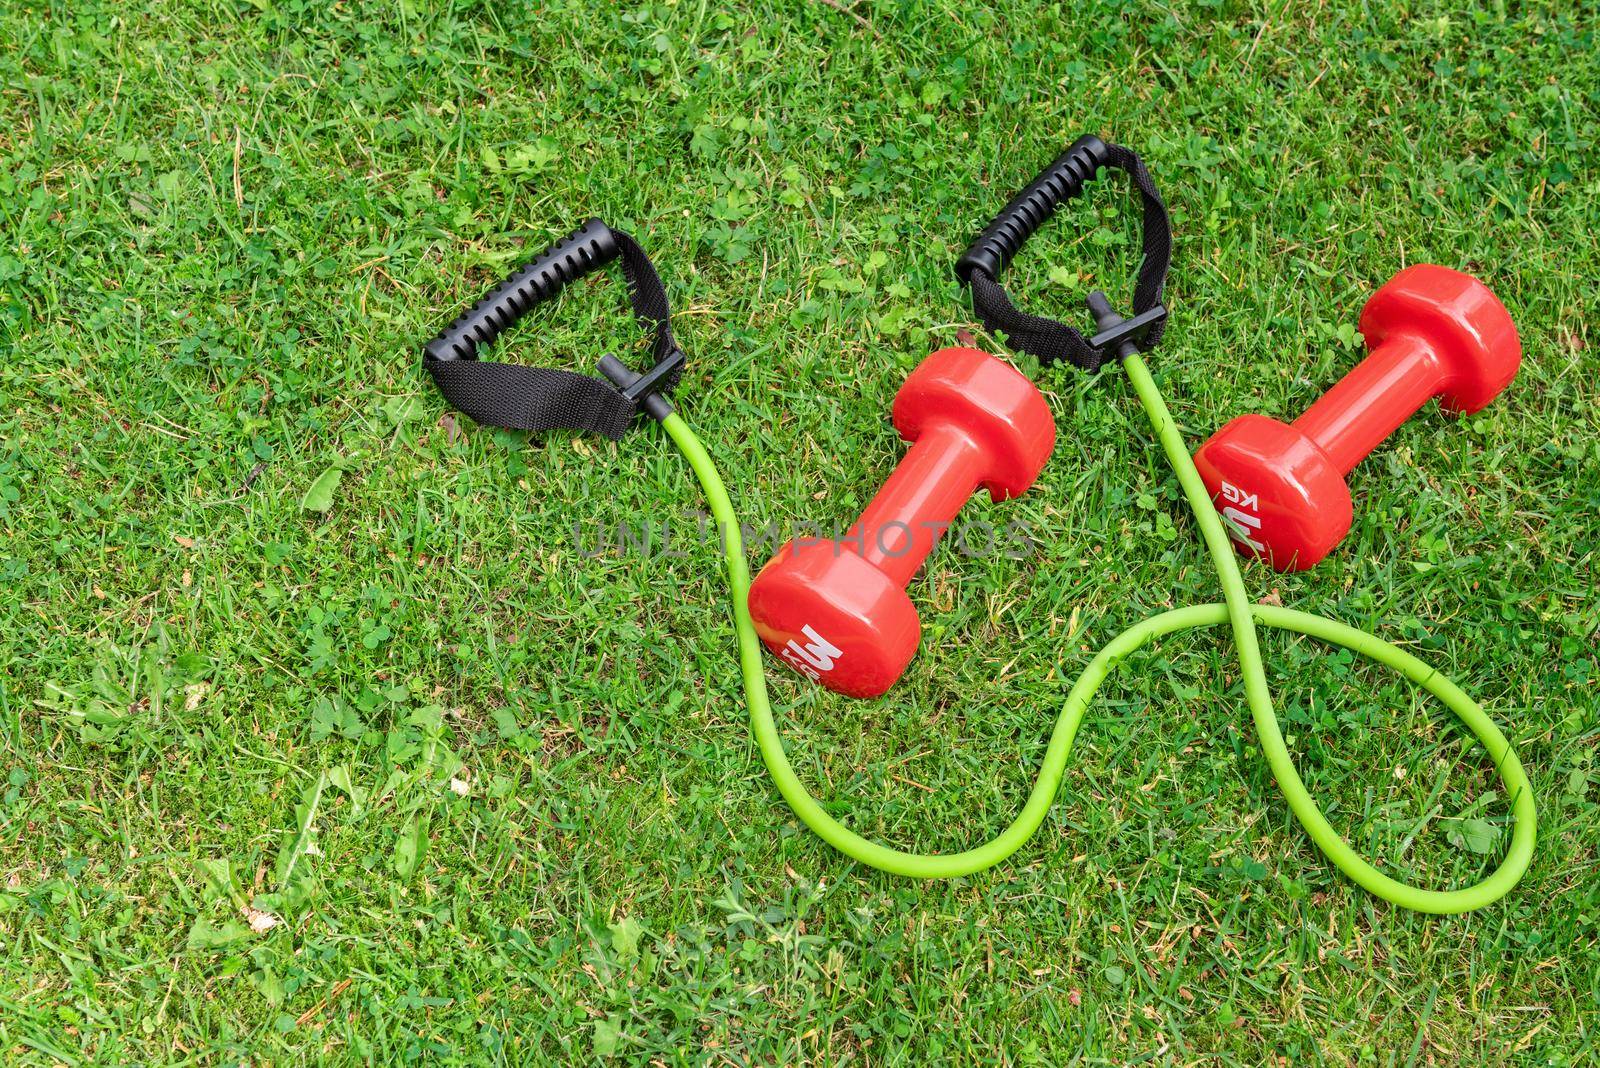 Ladie's dumbbells and fit tube the green grass background, top view. Outdoor training concept. Copy-space.